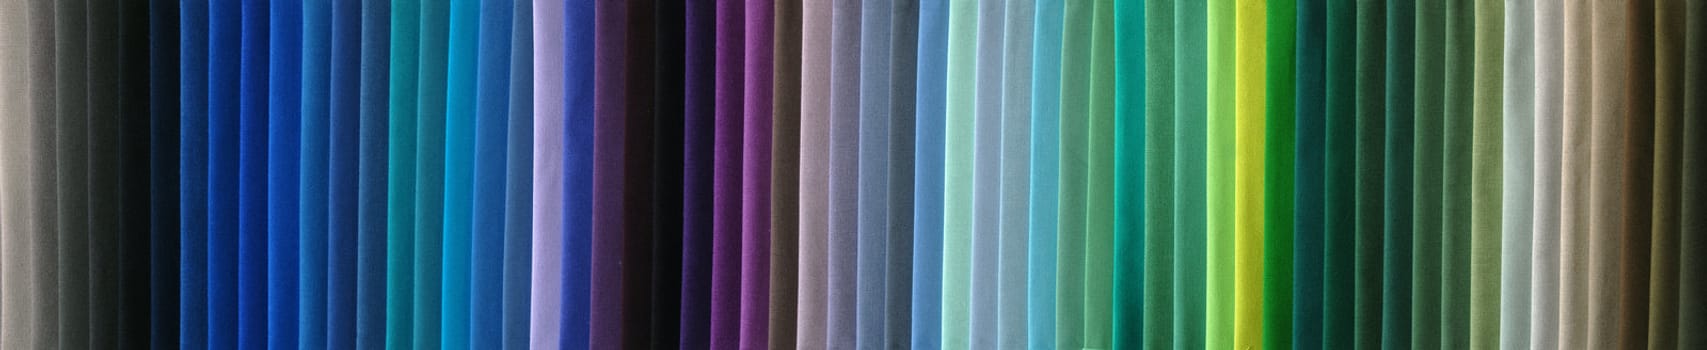 Many fabric color samples together as color spectrum.